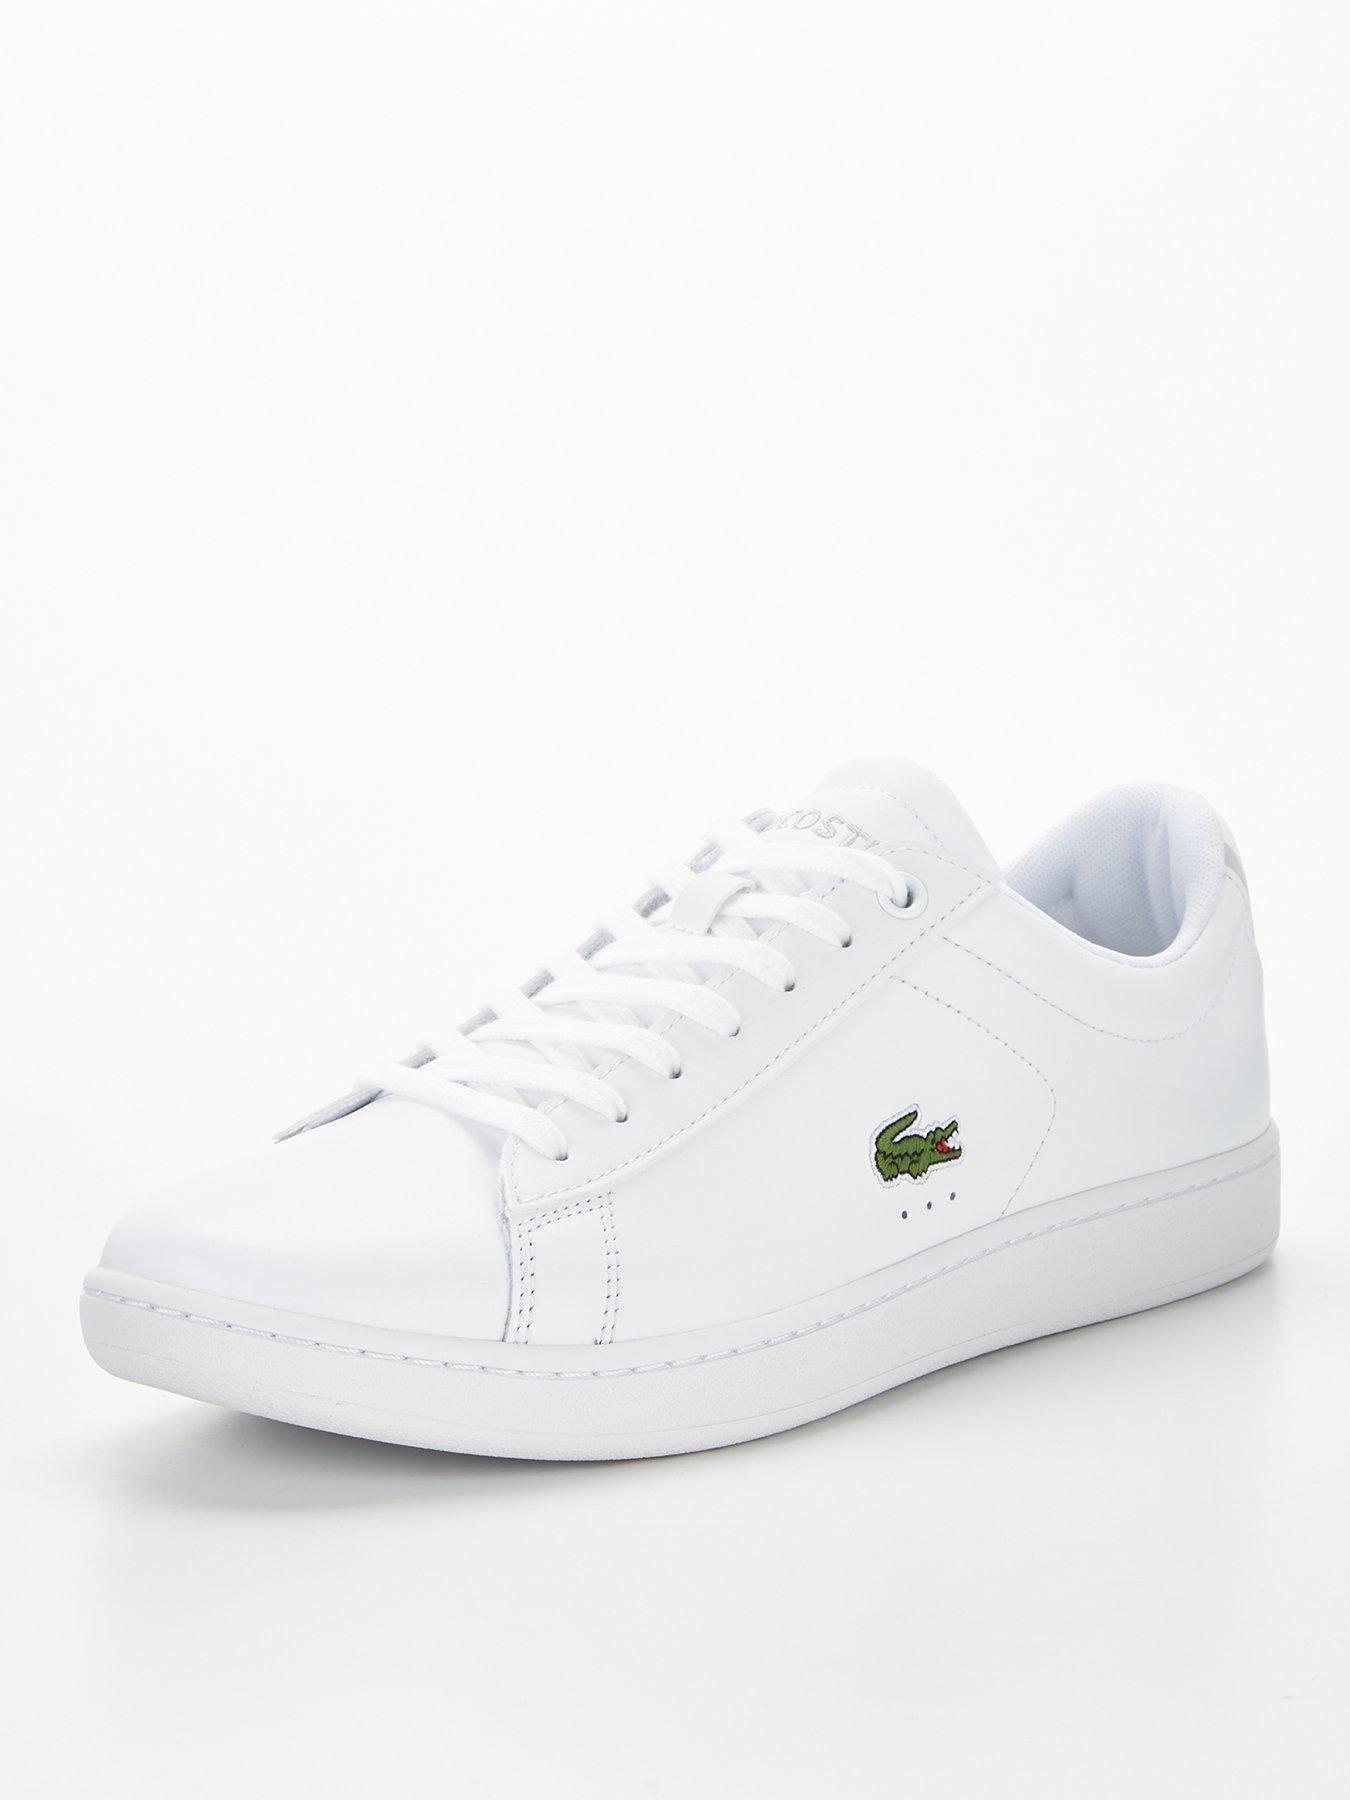 mens lacoste trainers size 12